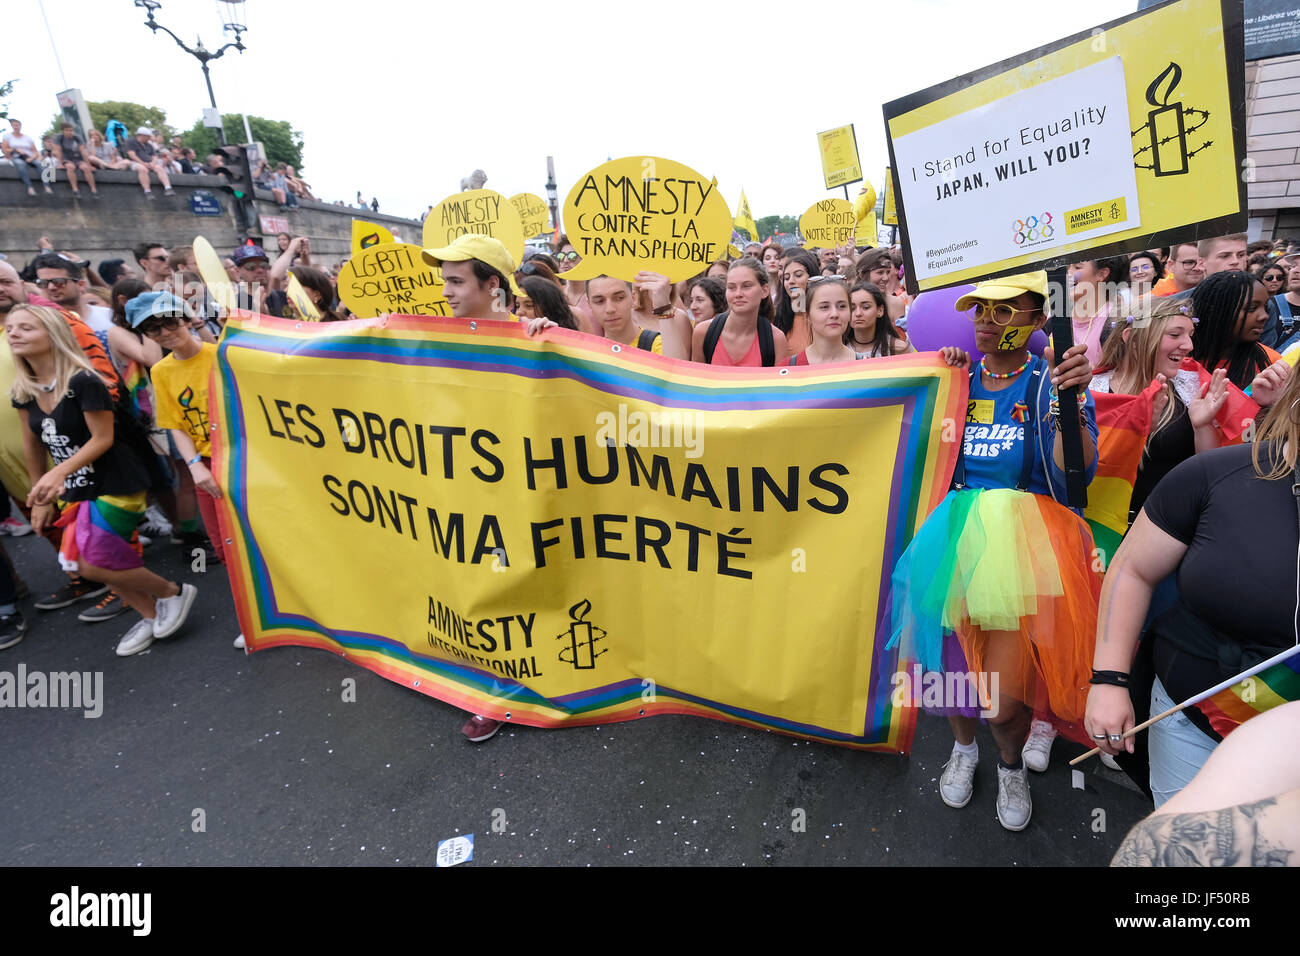 People take part in the Paris Gay Pride Parade, or known as Marche des Fiertes LGBT in France, on June 24, 2017 in Paris, France. Credit: Yuriko Nakao/AFLO/Alamy Live News Stock Photo